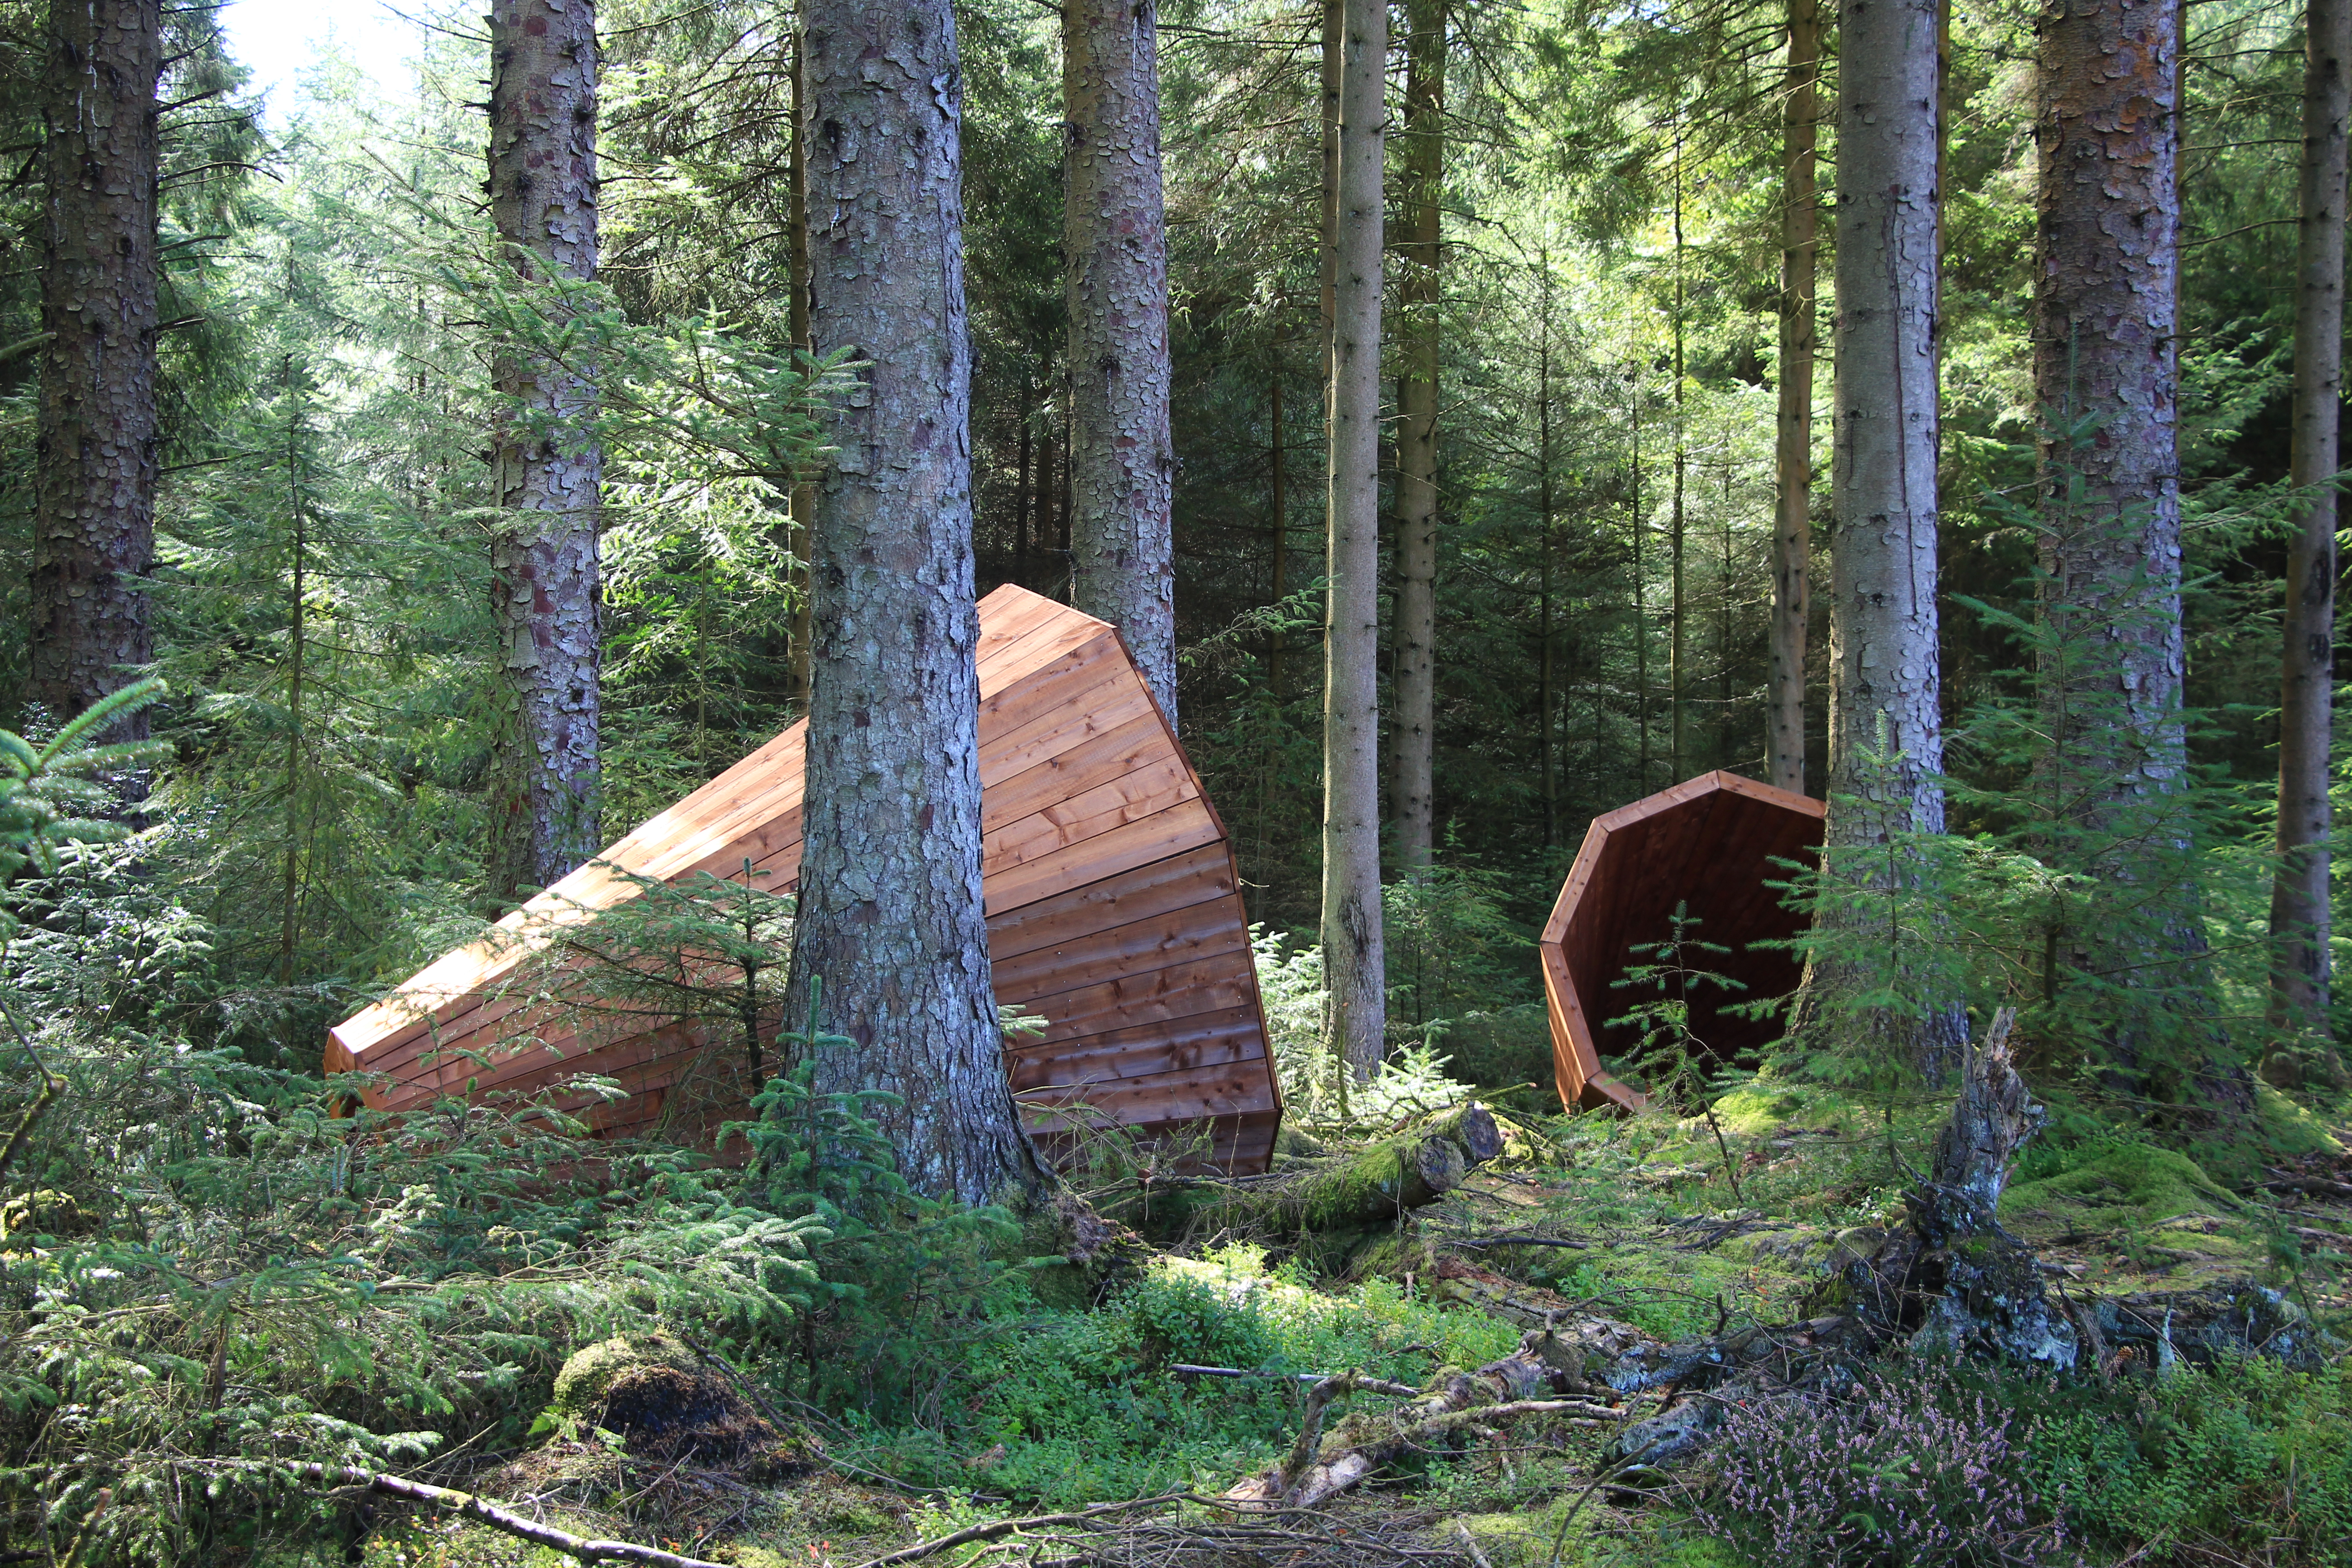 A photograph of two wooden sculptures within a forest. The sculptures are in a cone shape.